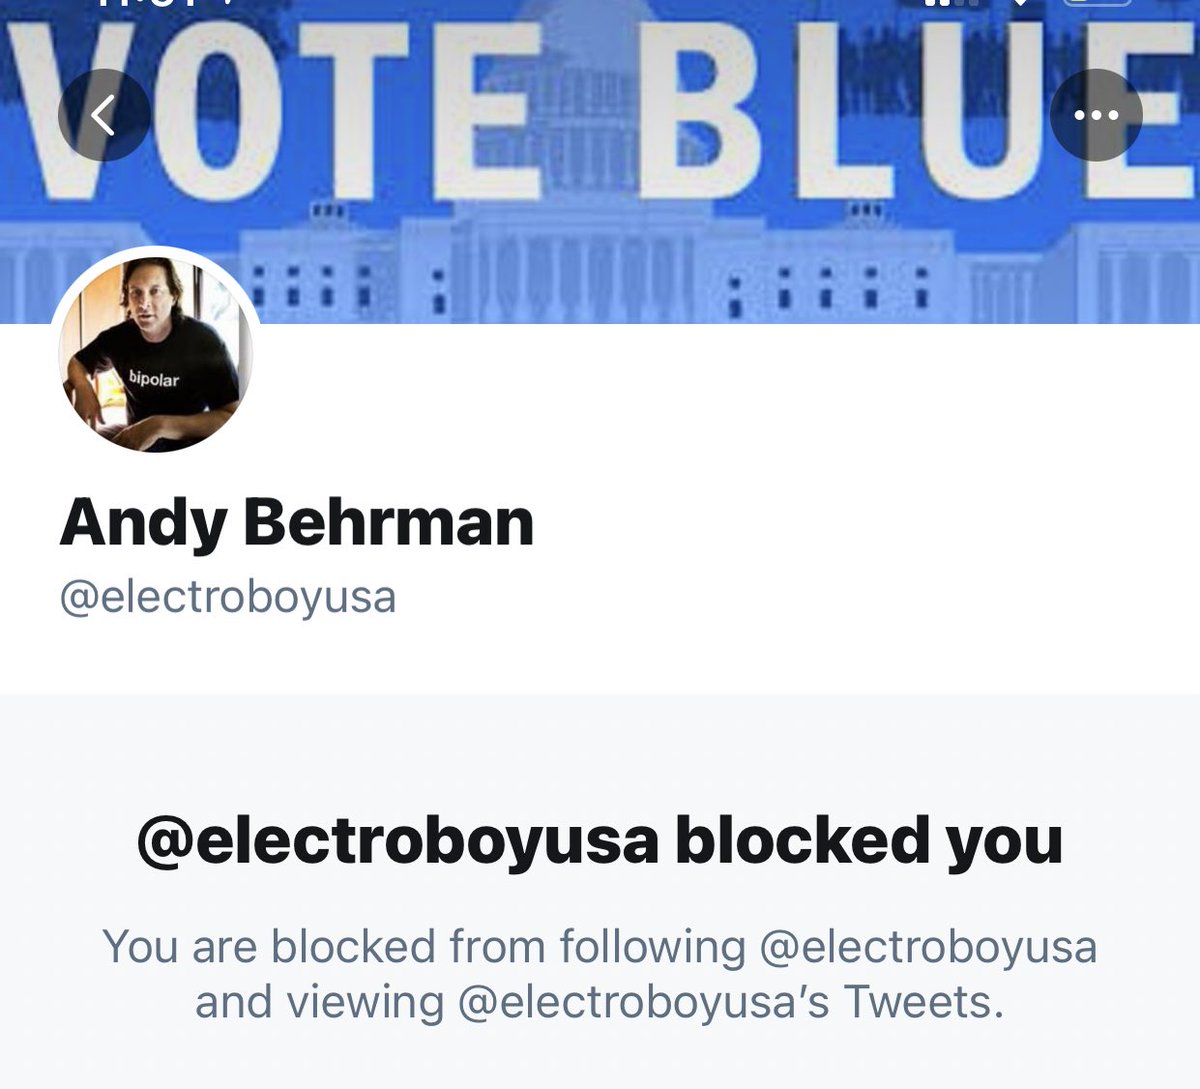 Andy is not appreciating me pointing out the above.  @electroboyusa